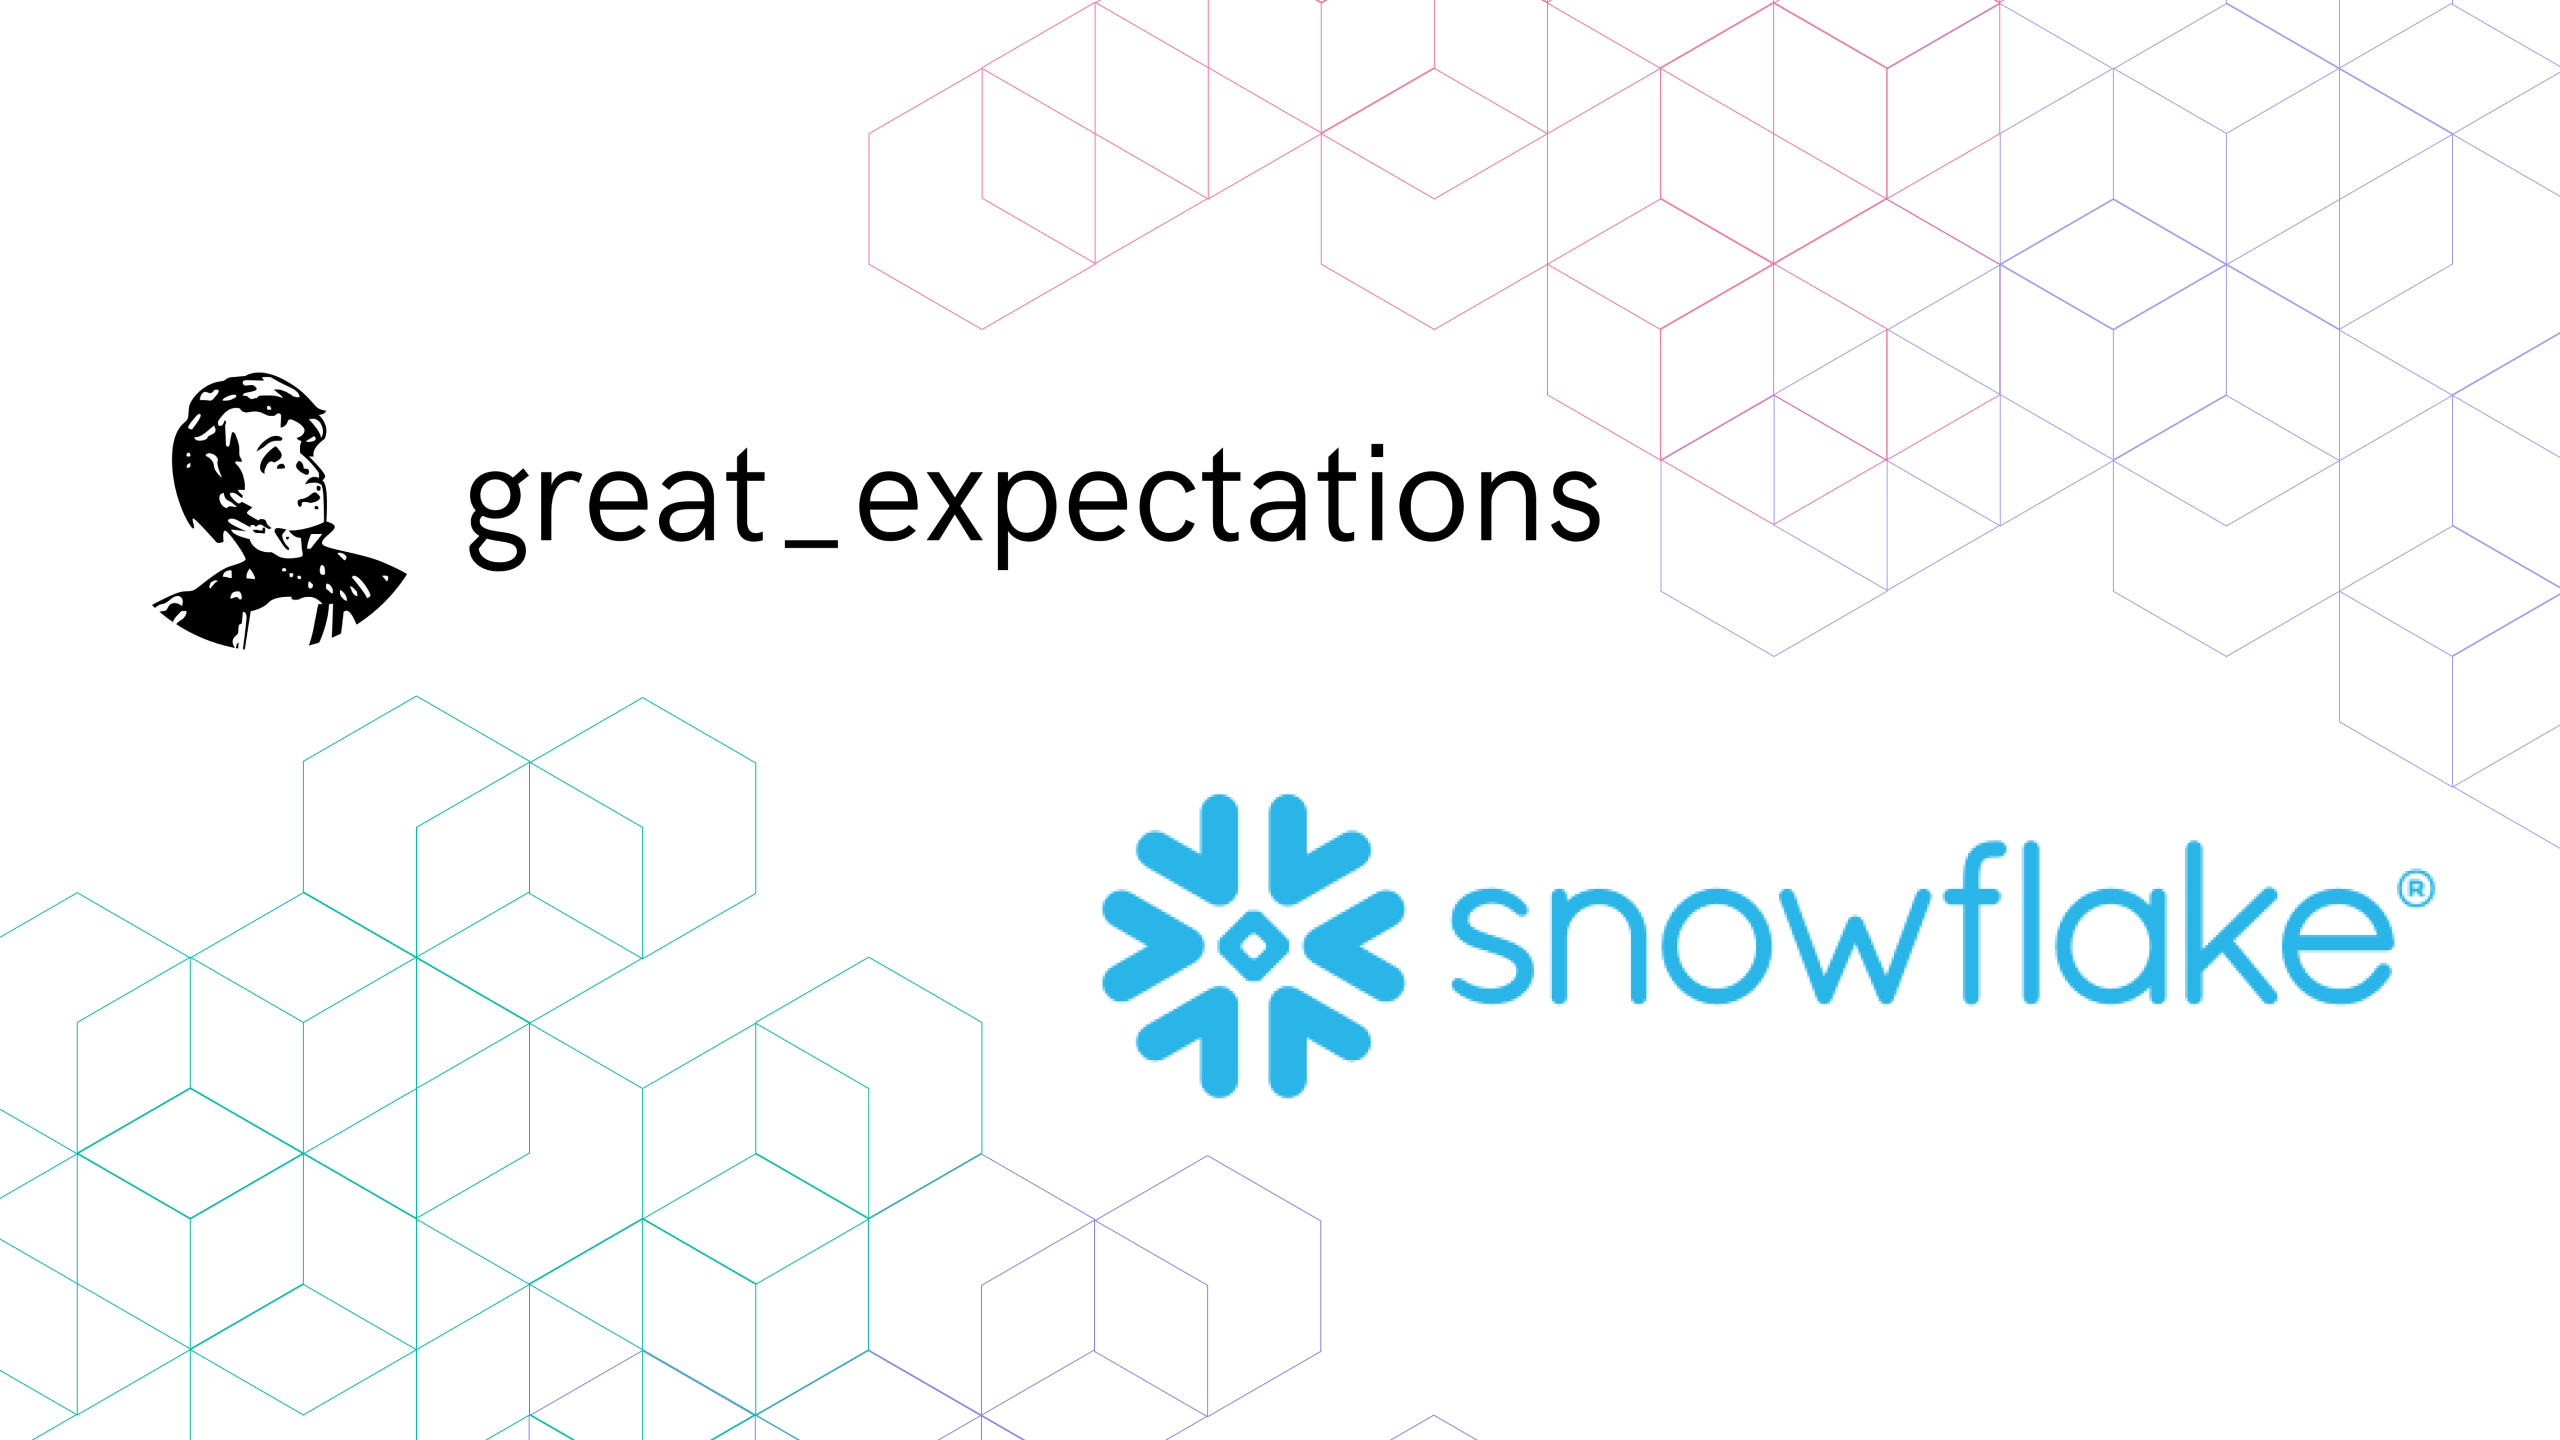 Great Expectations and Snowflake logos